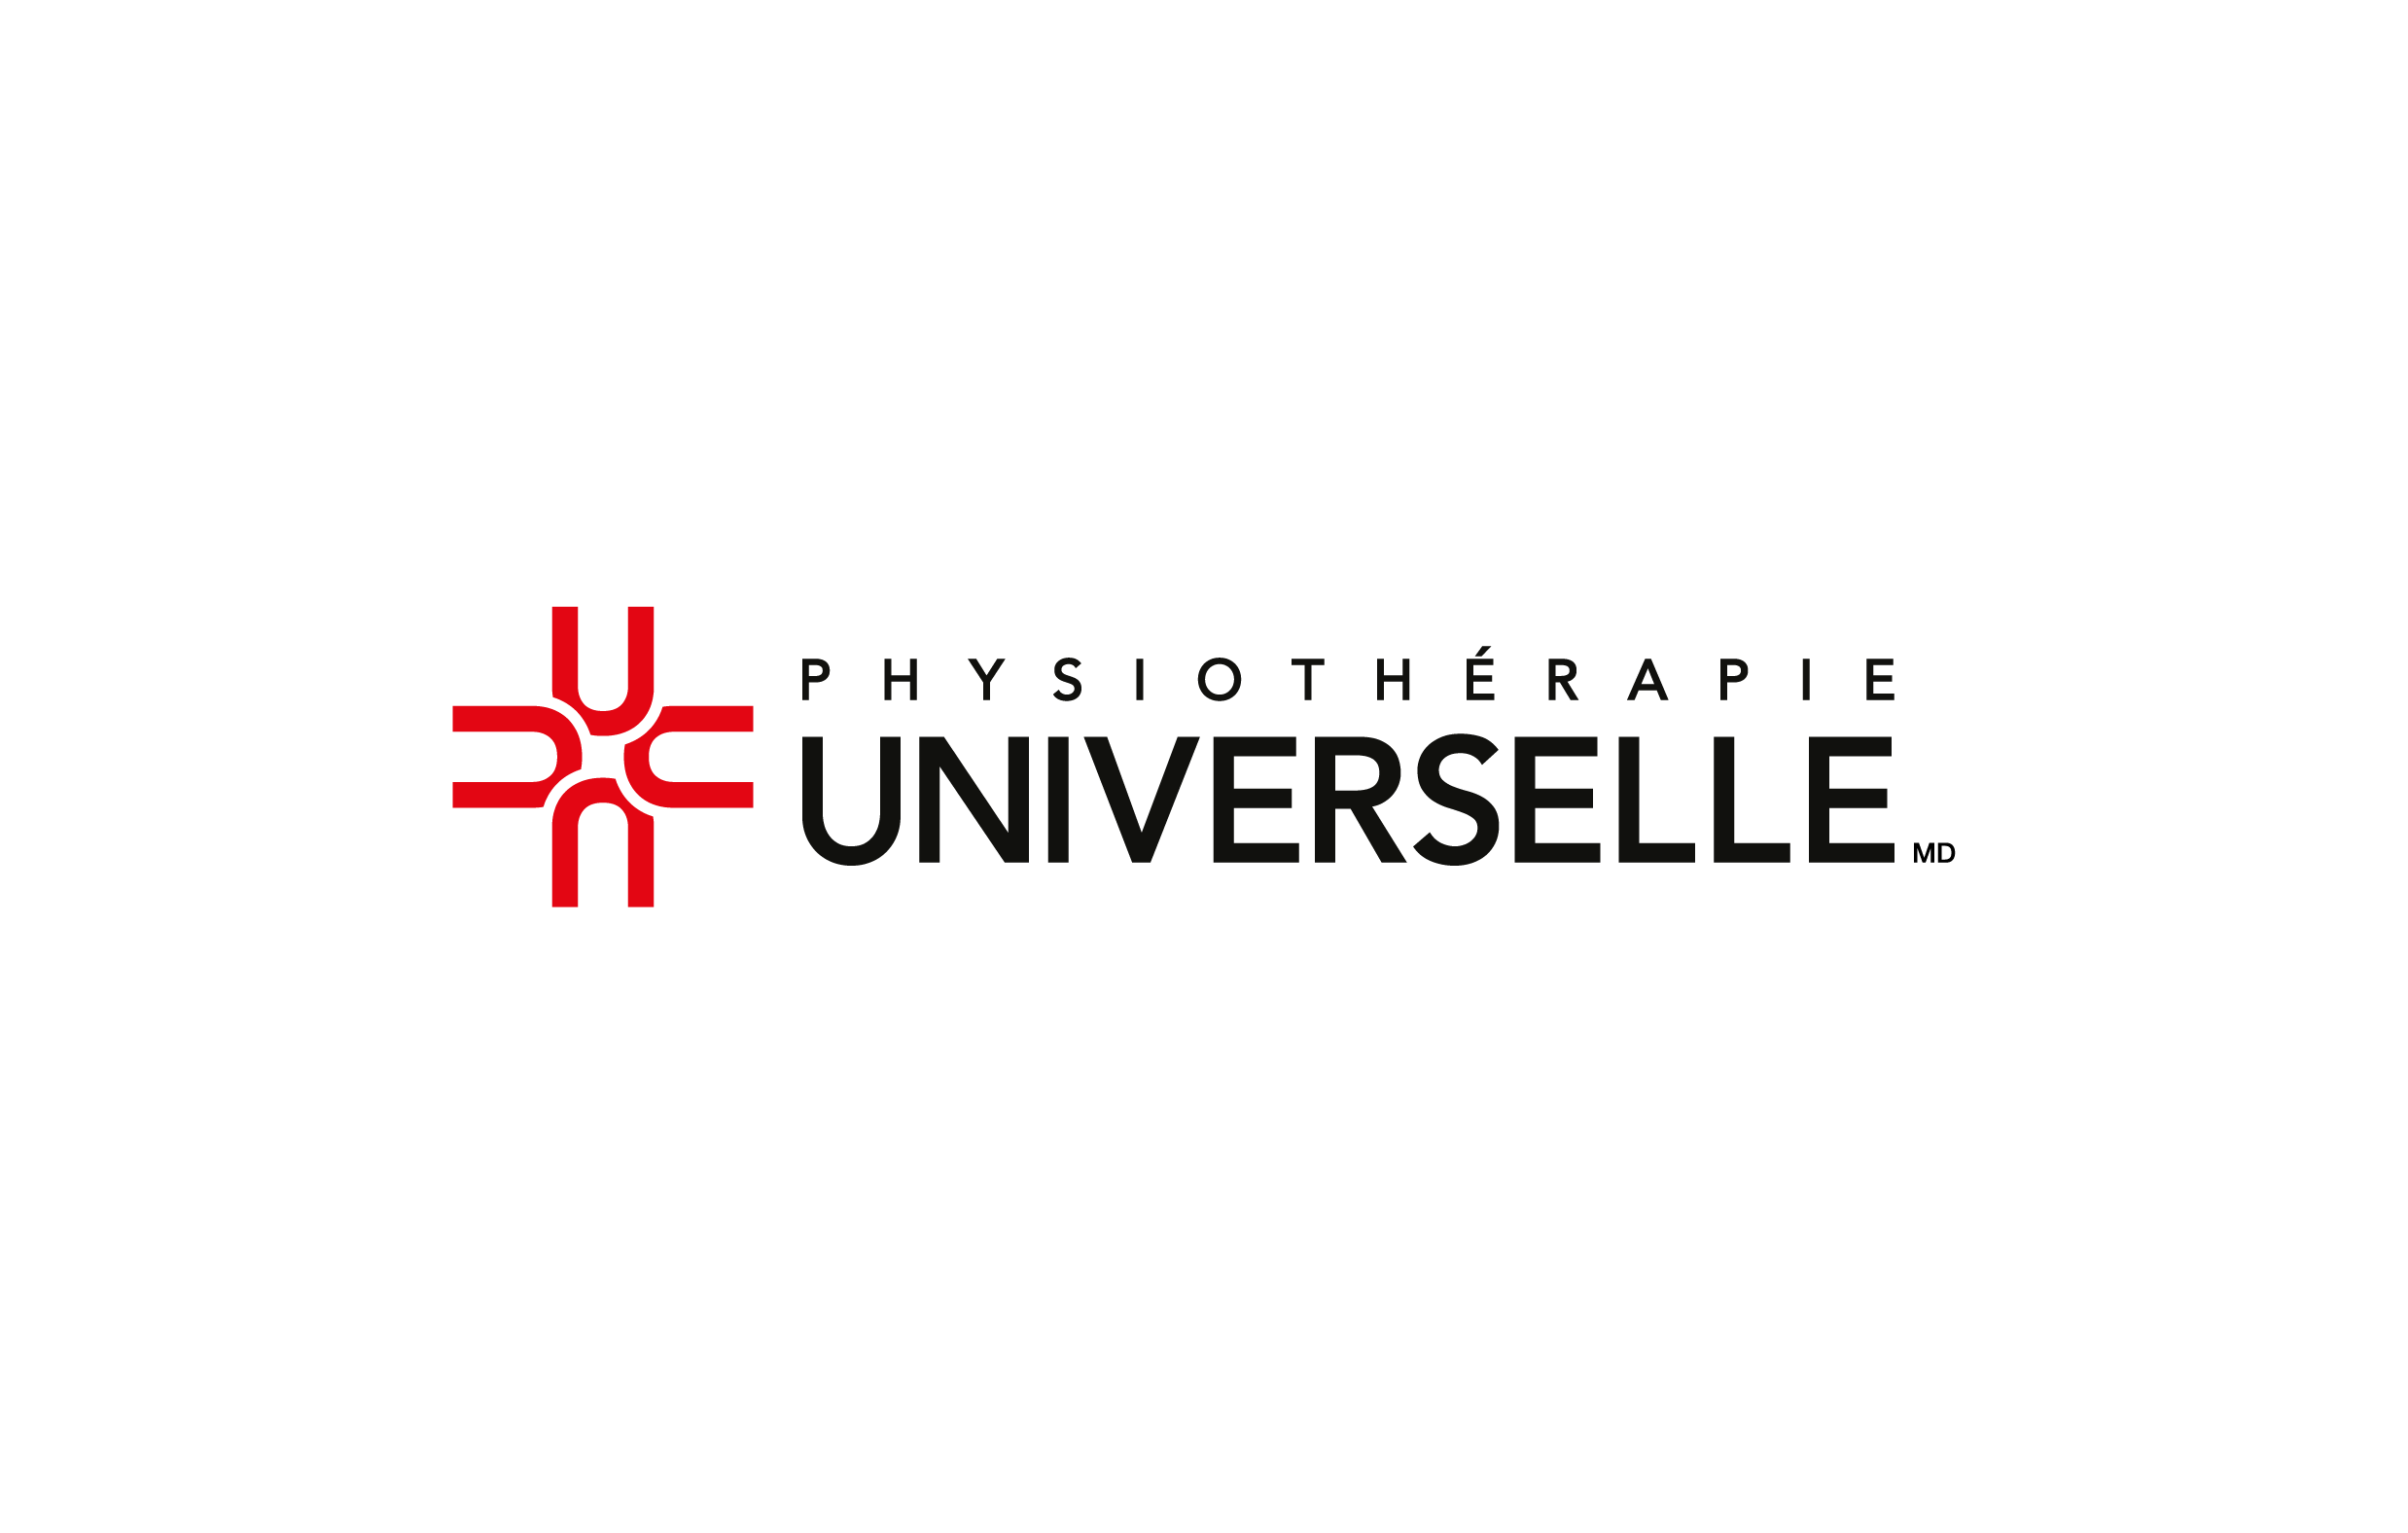 Physio universelle